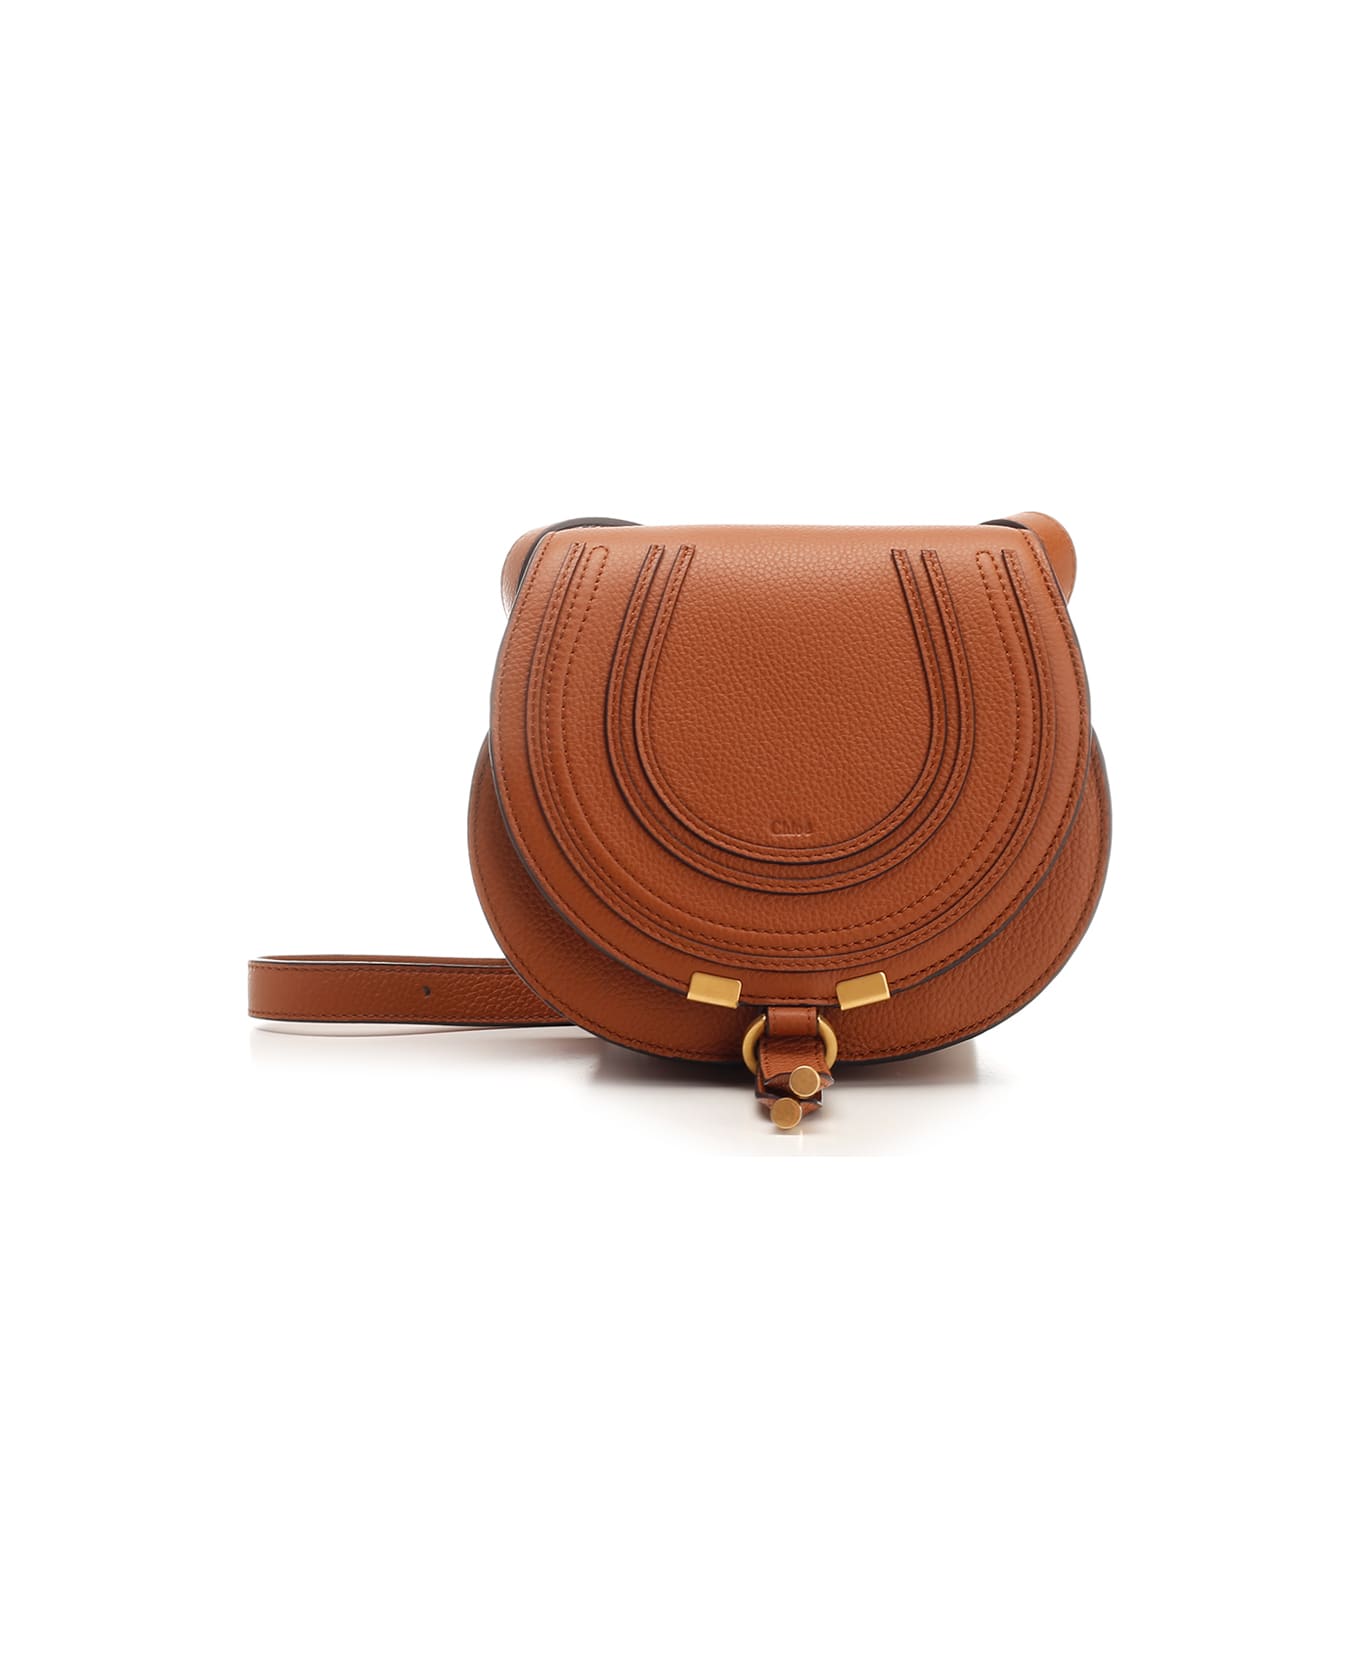 Chloé 'marcie' Small Cross-body Bag - Leather Brown トートバッグ